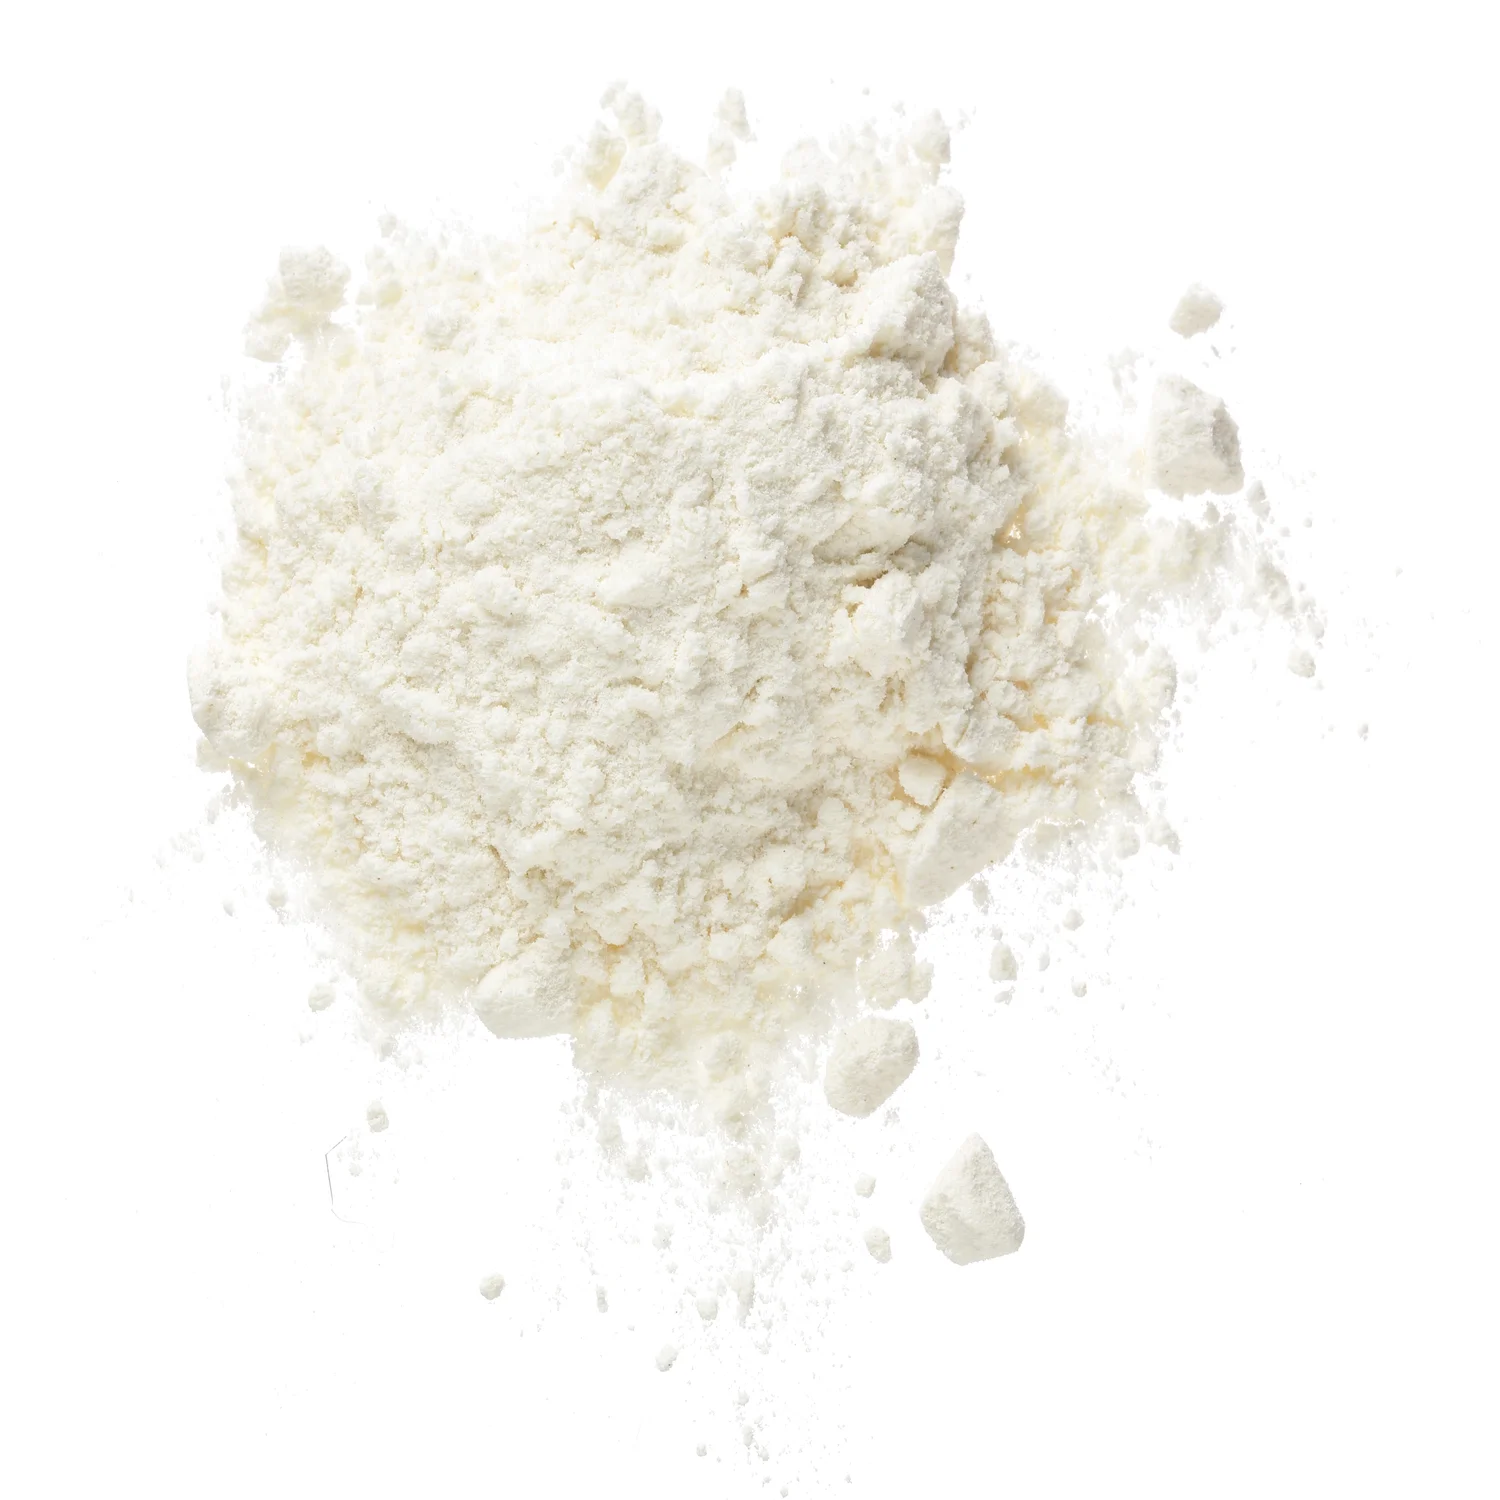 Private Label Organic CBD Isolate Powder Made in USA Low Price Fast Shipping LOW MOQs No THC Bulk